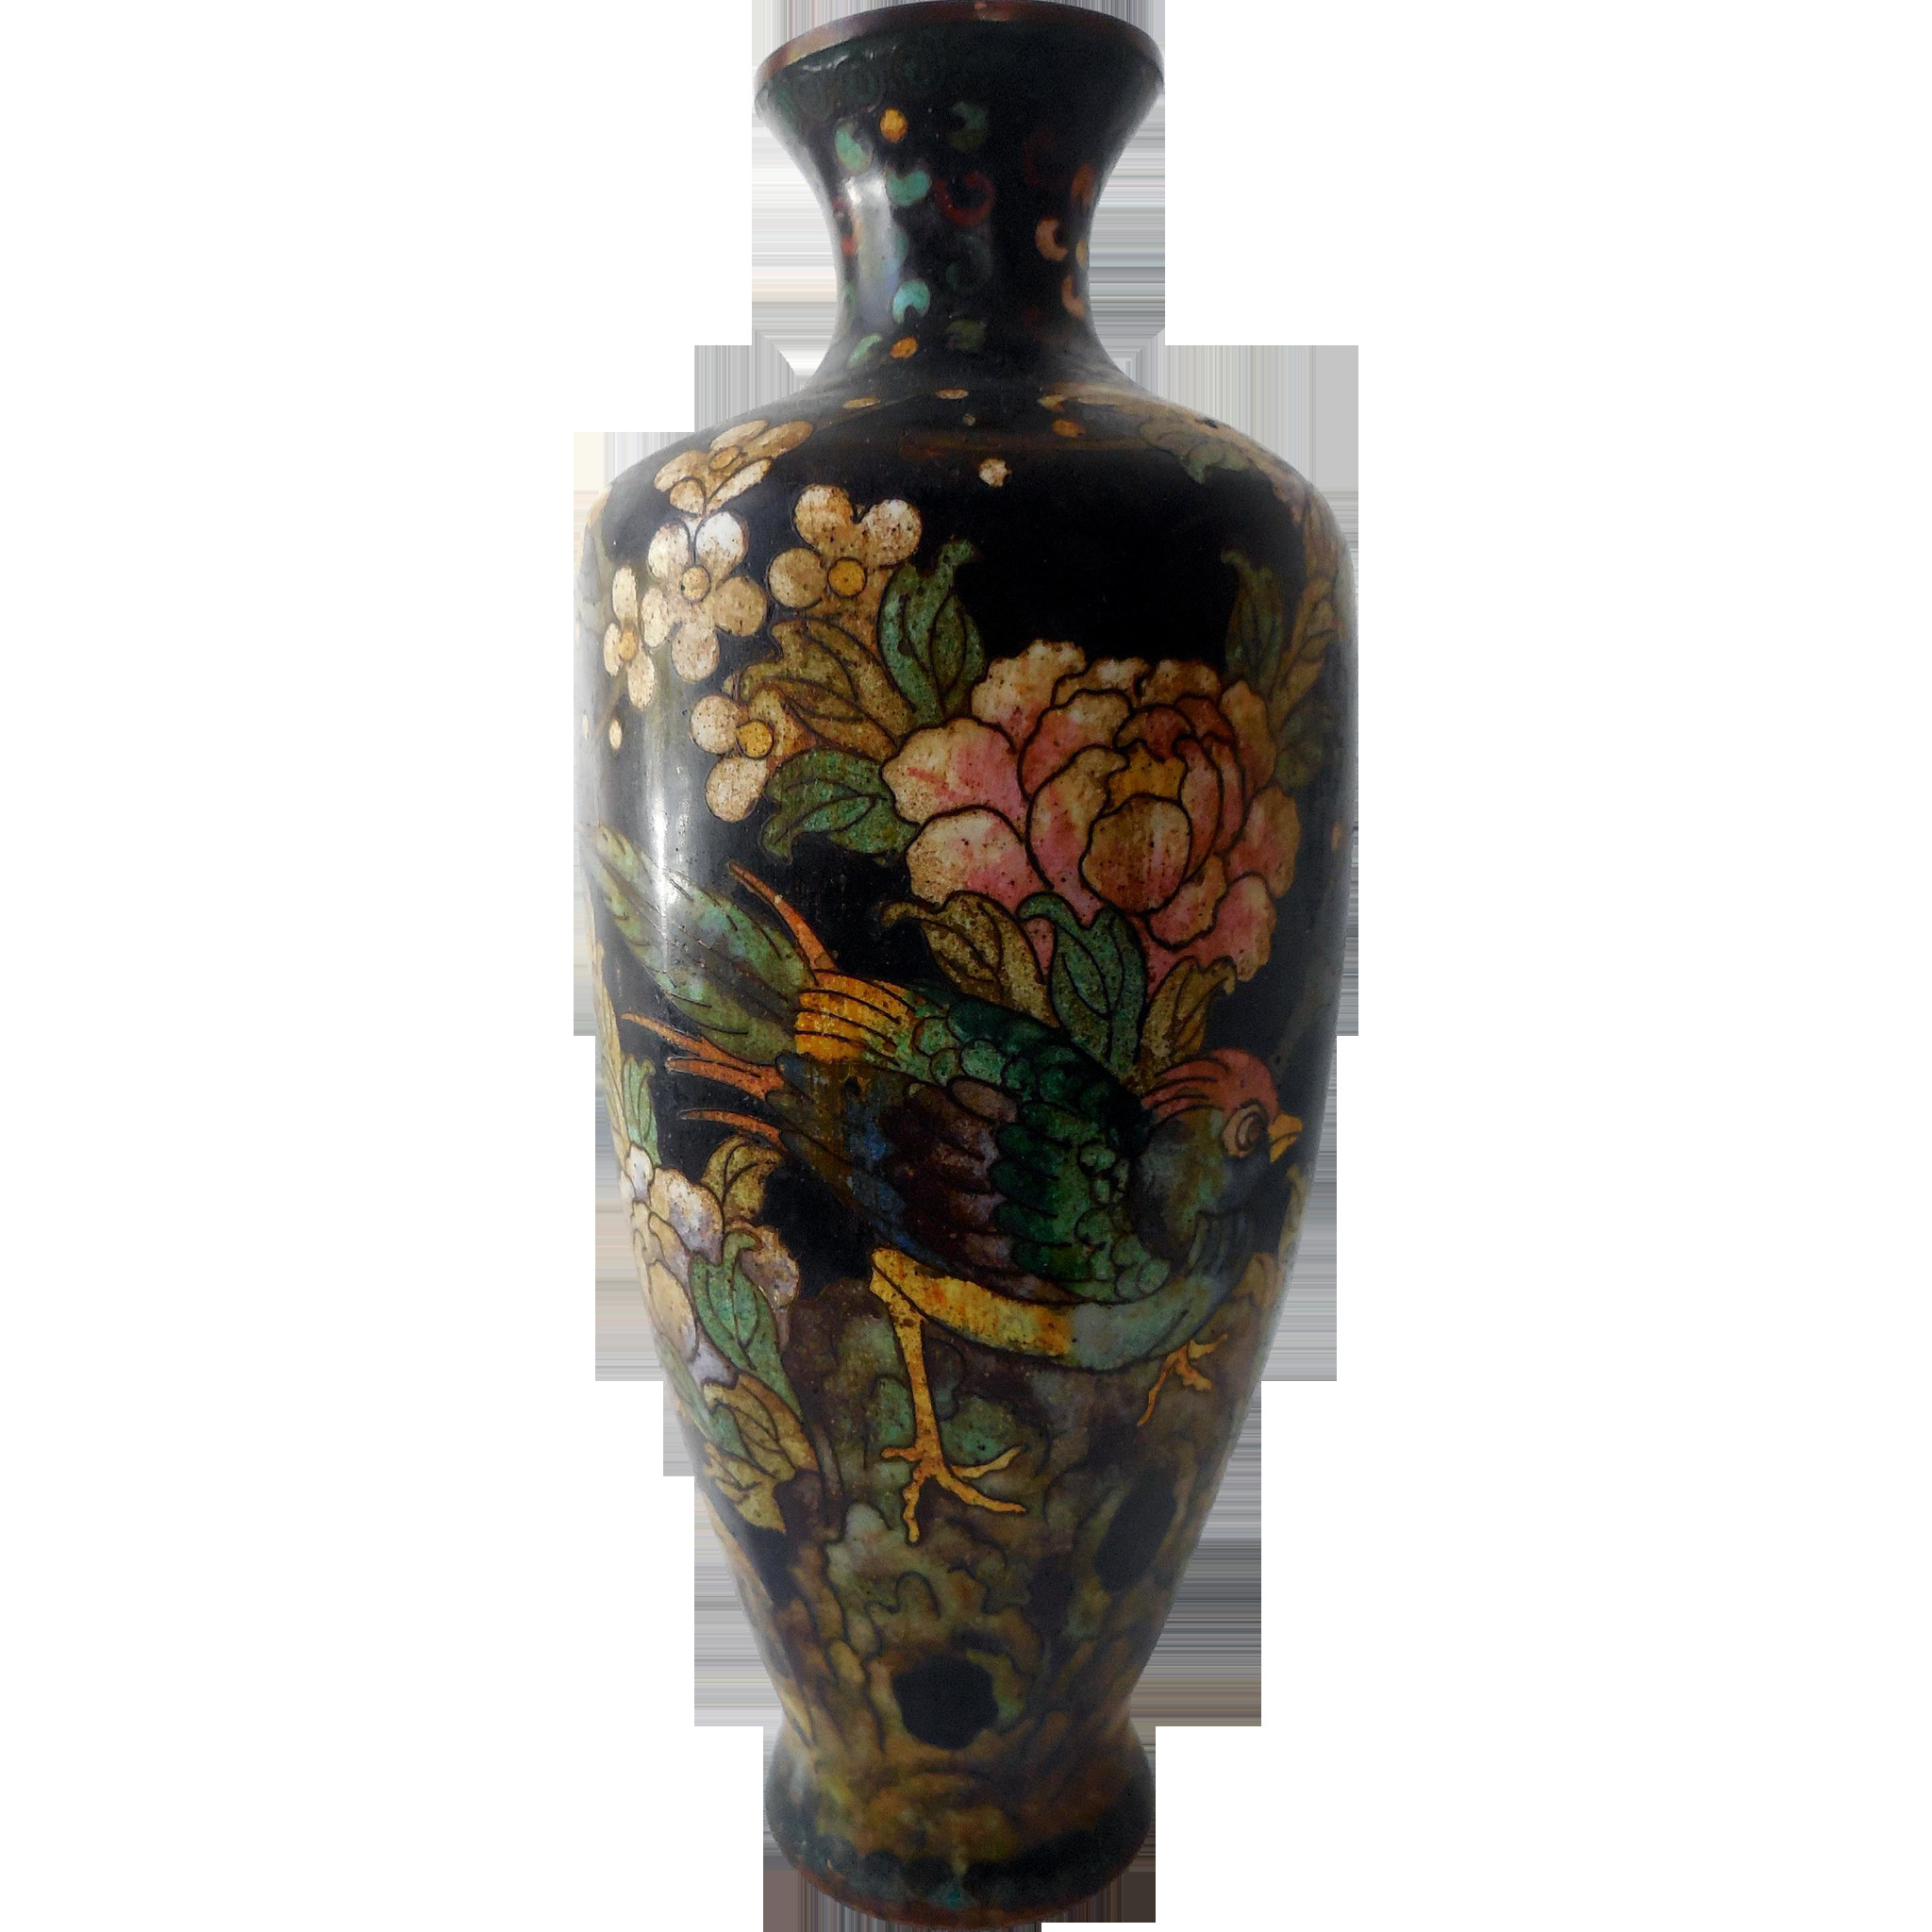 26 Awesome Ming Dynasty Vase for Sale 2024 free download ming dynasty vase for sale of antique chinese cloisonne vase 19th c great ming mark japanese throughout antique chinese cloisonne vase 19th c great ming mark